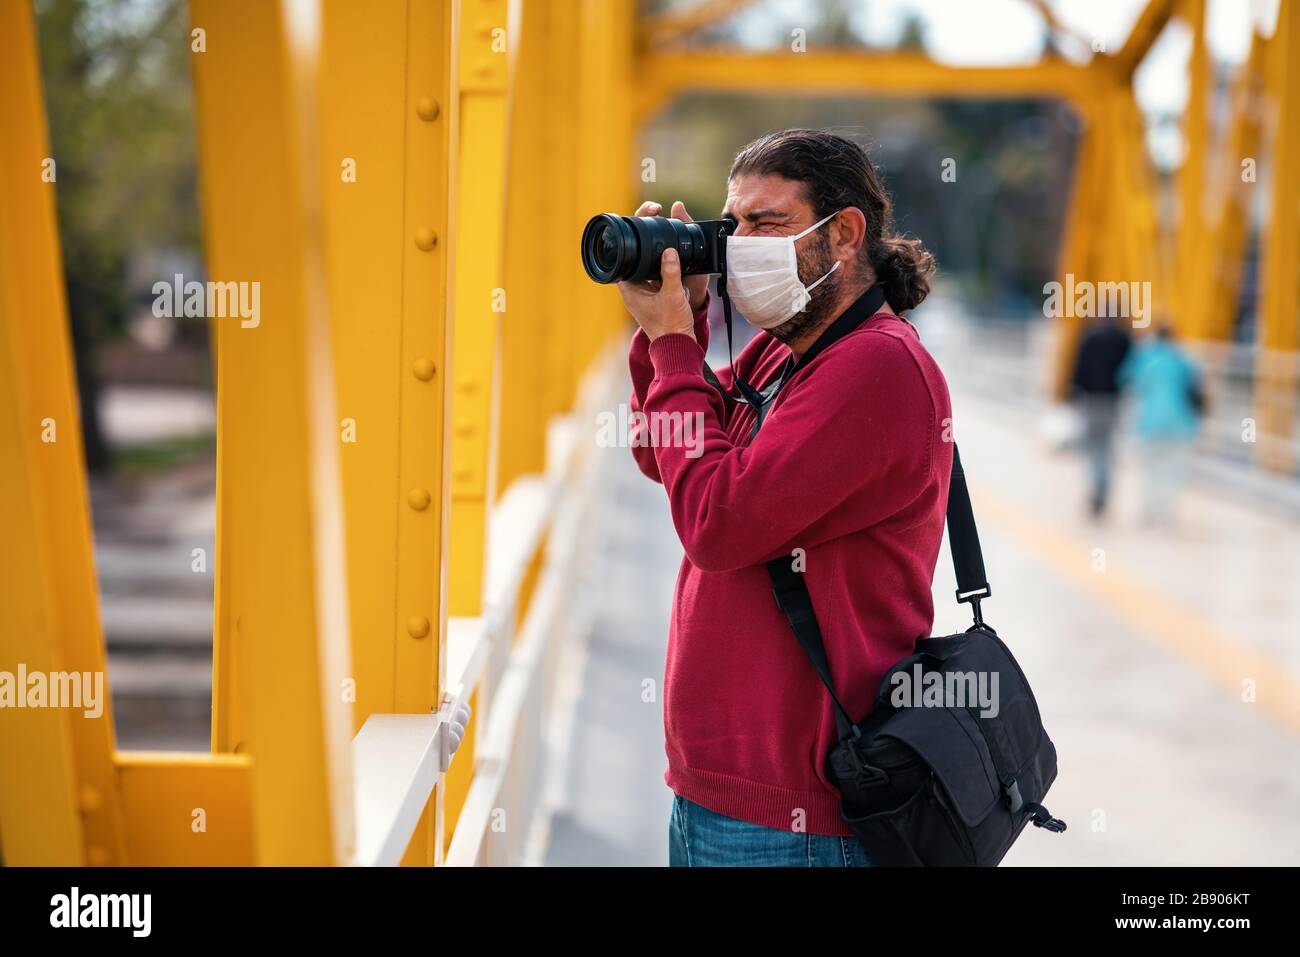 A photographer journalist shoot to reckless people on crowded street with a mask in a quarantine period because of pandemic global danger Stock Photo